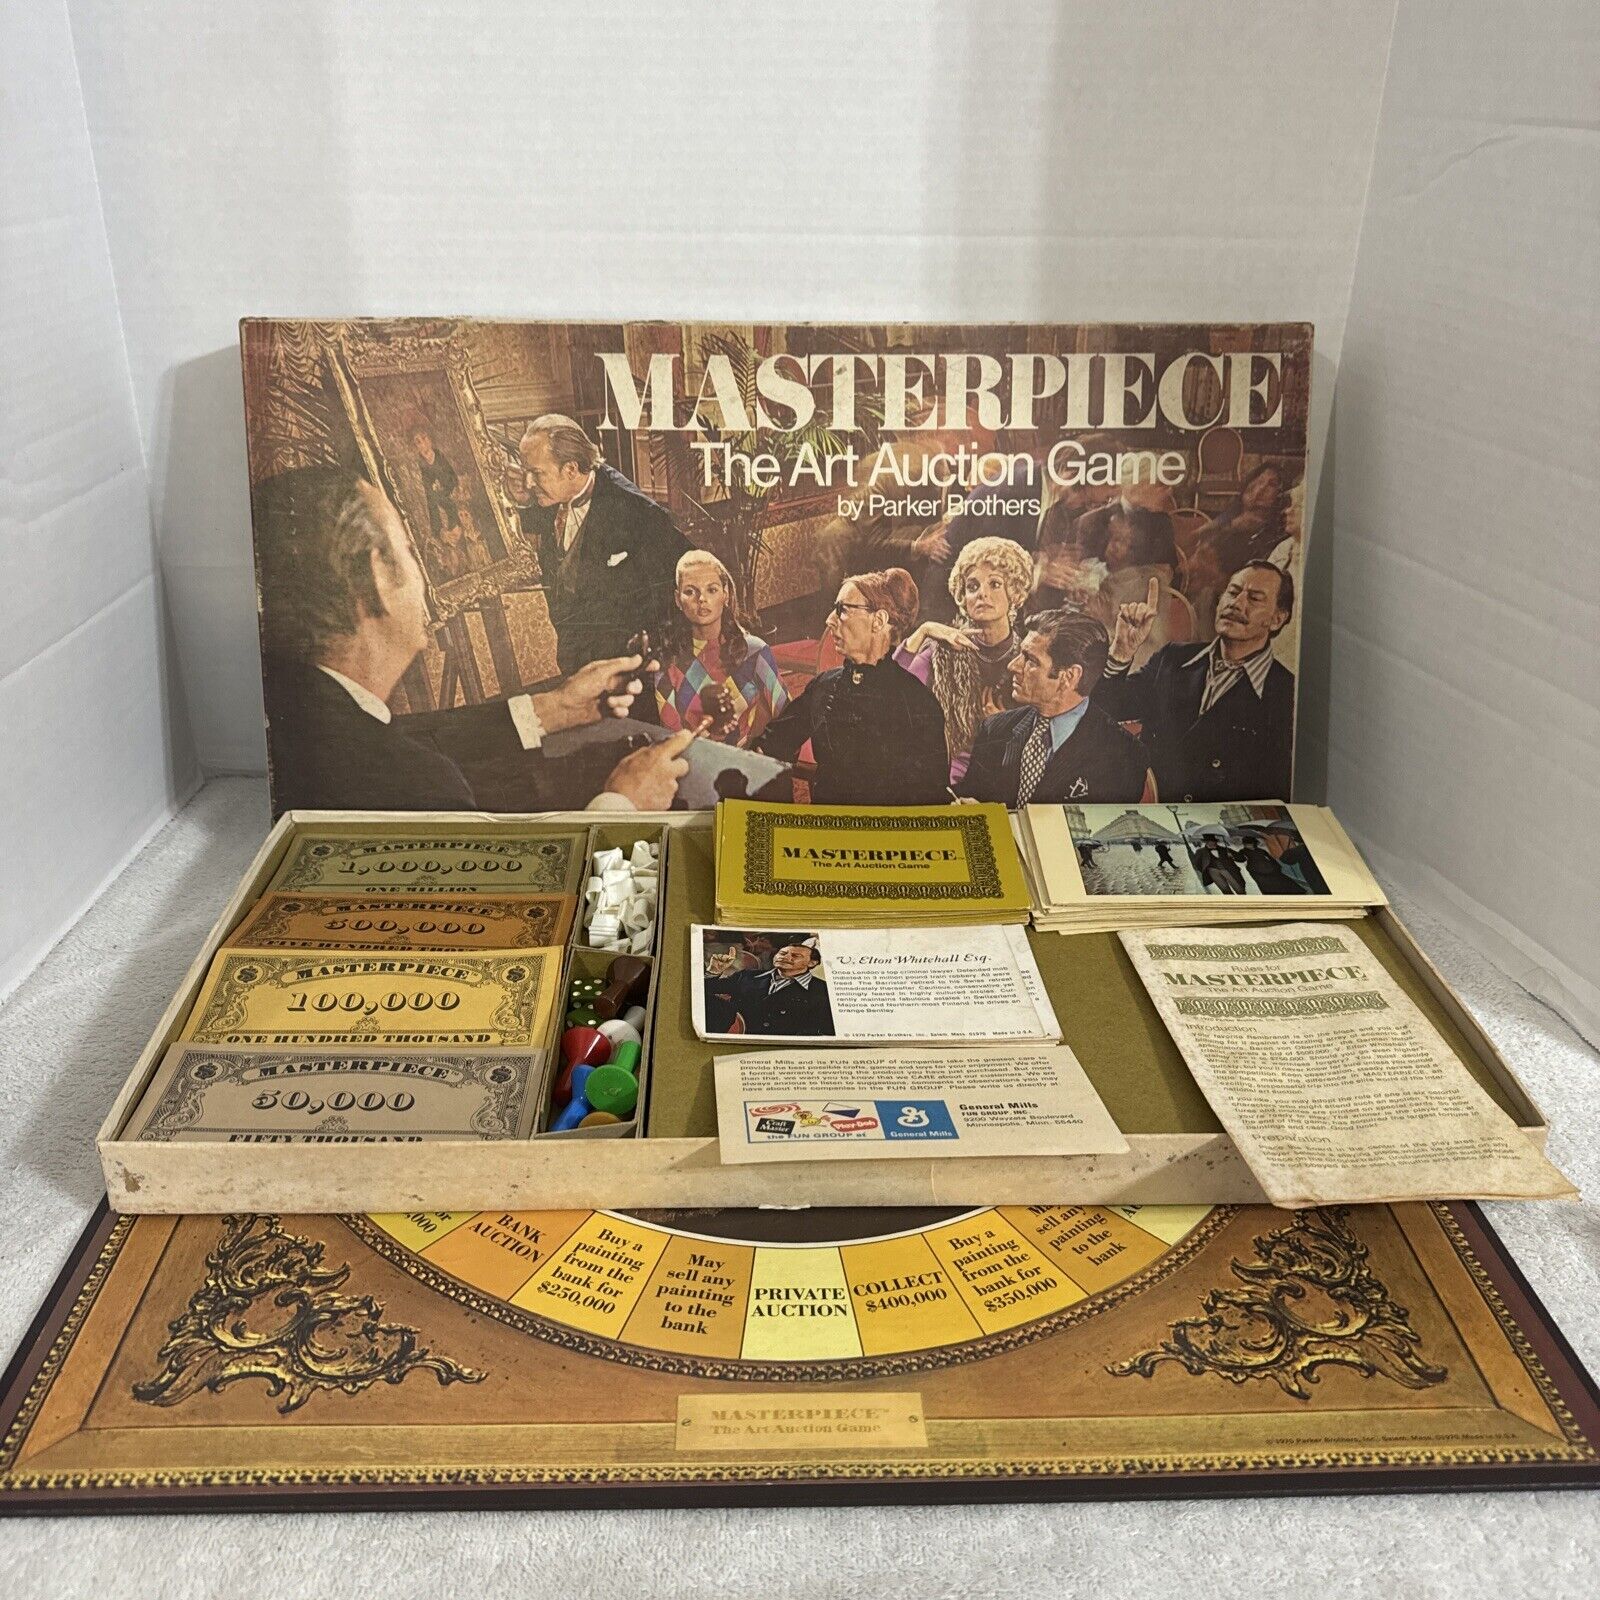 Vintage Masterpiece The Art Auction Game Parker Brothers 1970 Edition, Complete